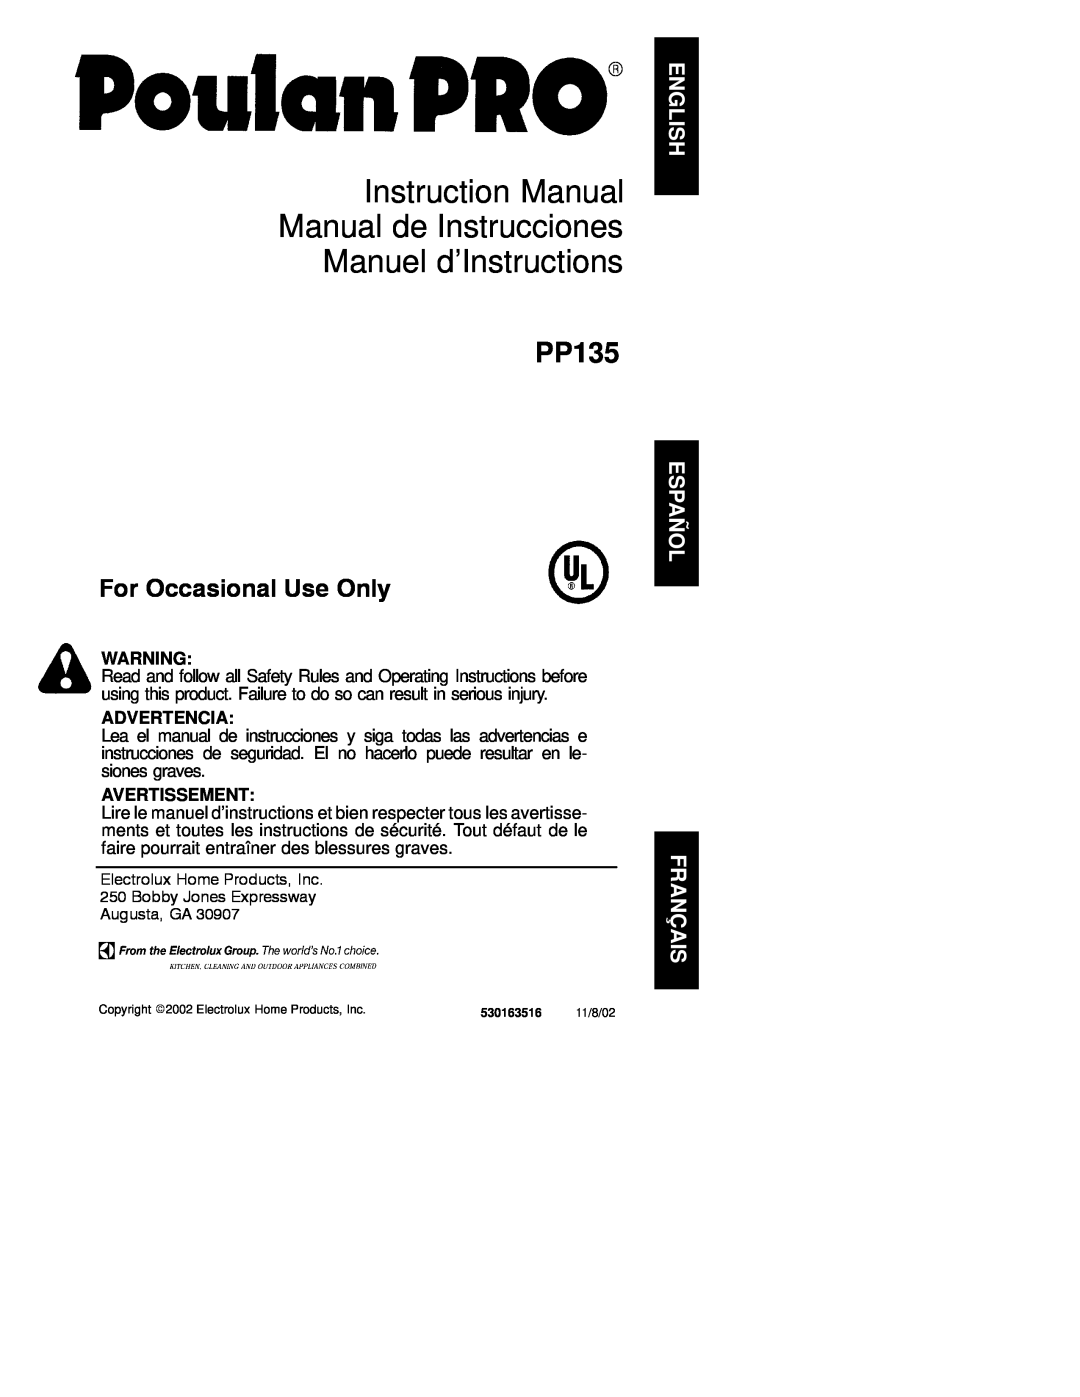 Poulan 530163516 instruction manual Advertencia, Avertissement, PP135, For Occasional Use Only 